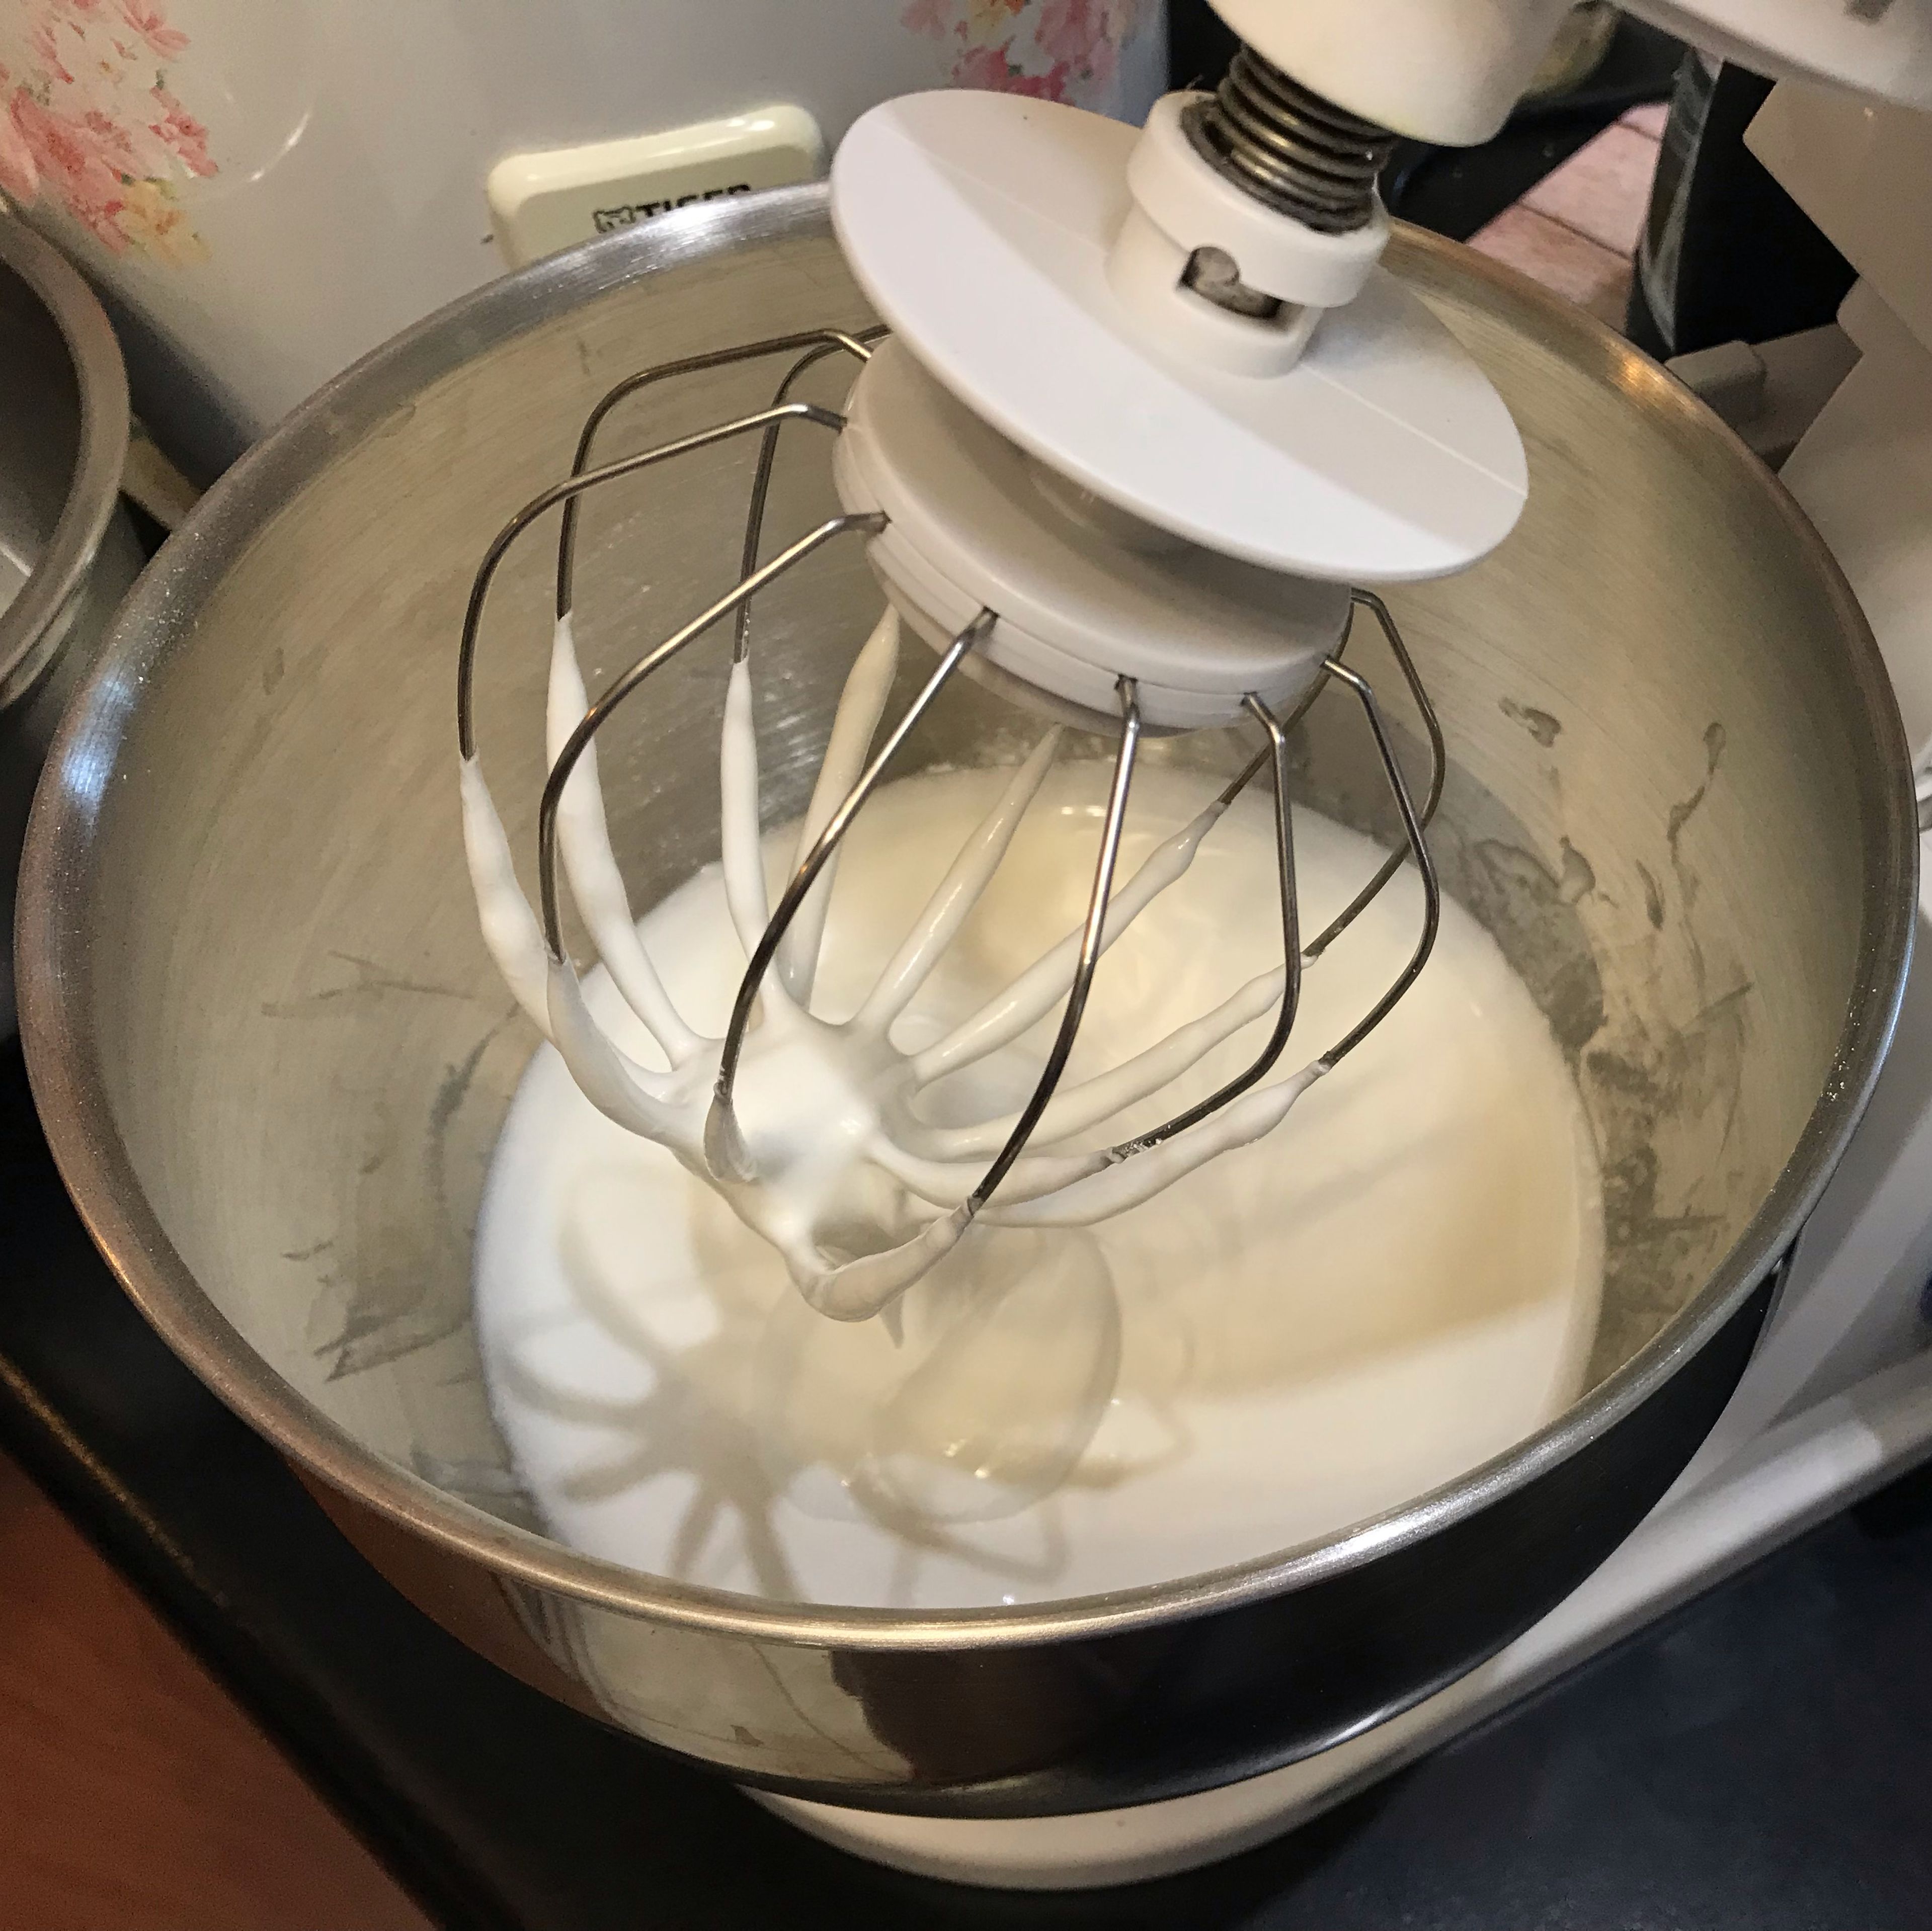 Place room-temperature pasteurised egg whites and powdered sugar in a stand mixer bowl. Attach the whisk and combine ingredients on low, then whip on high for 5 minutes.